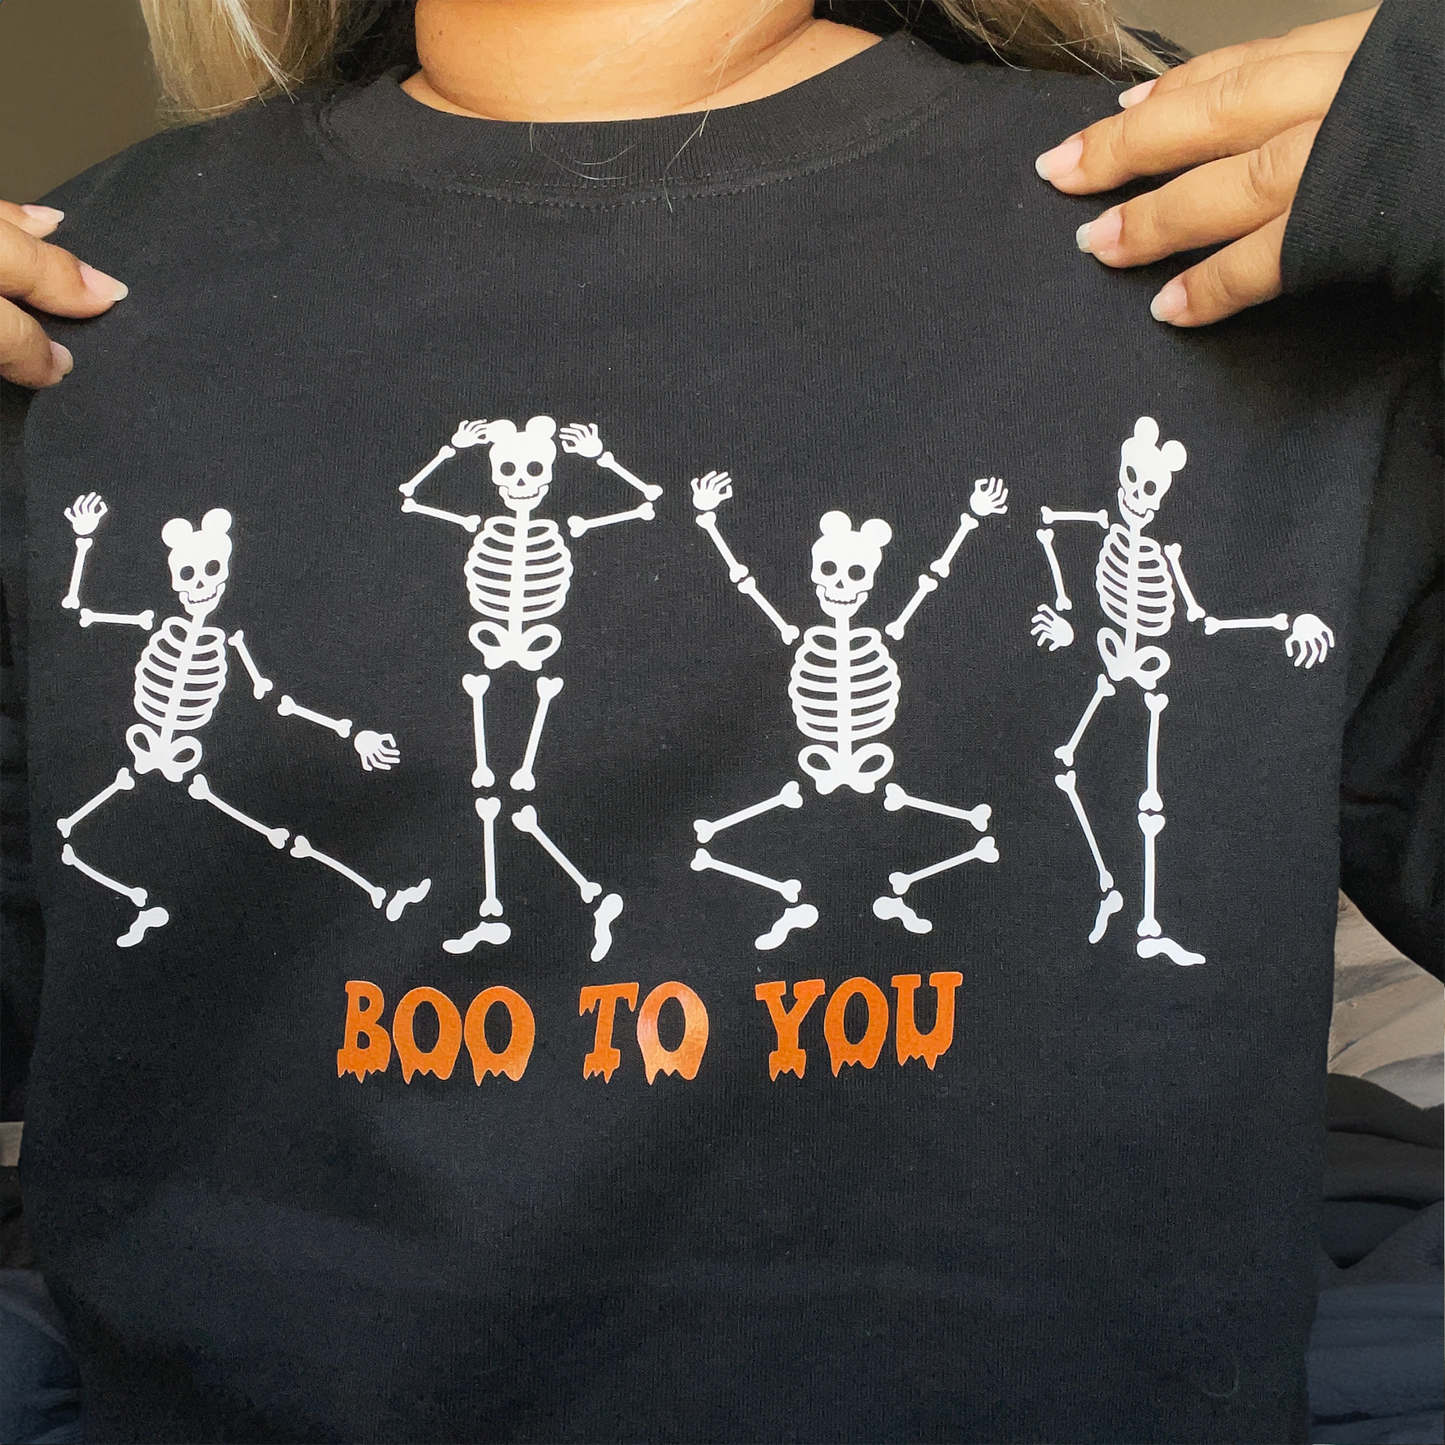 Boo to you Dancing Skeletons Black Adult Crew Neck Cotton Sweater